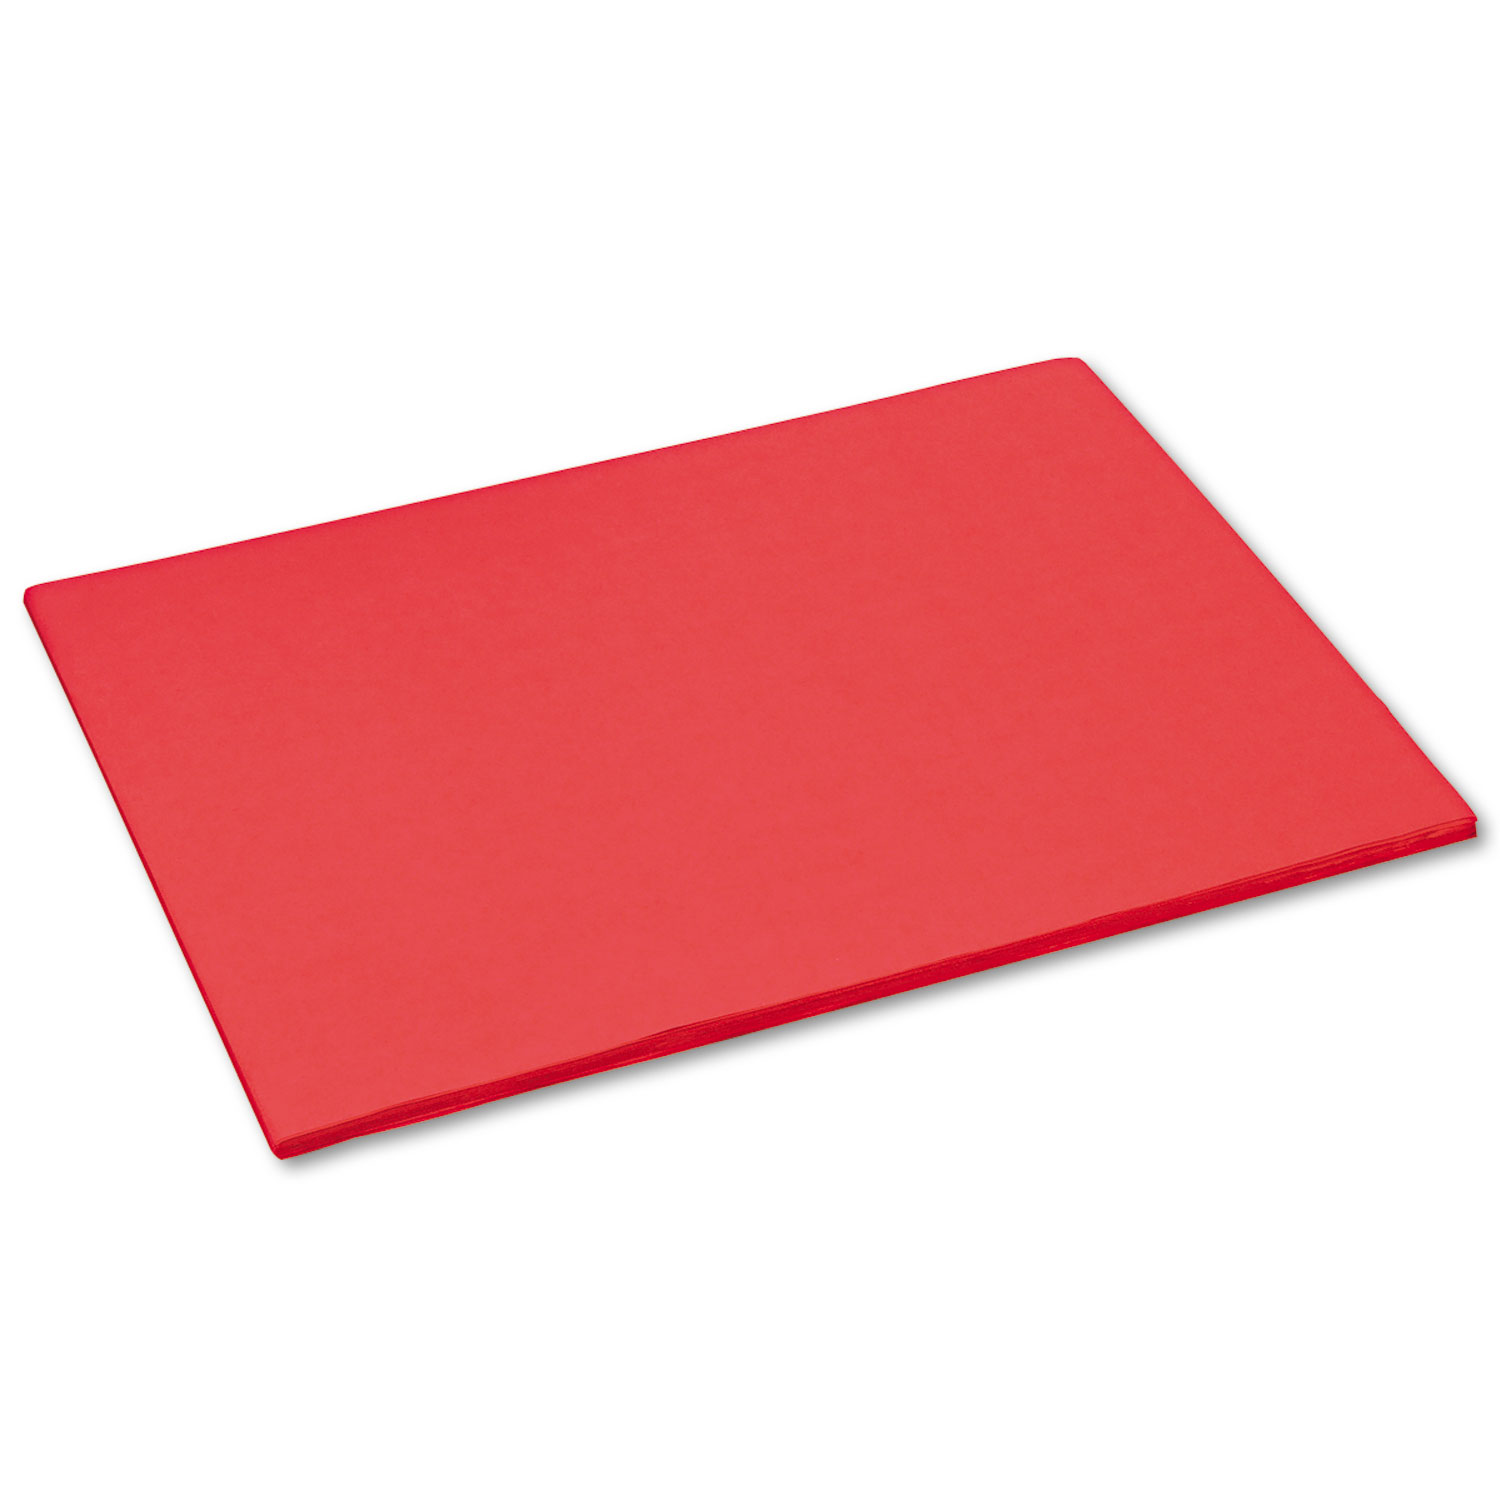 Tru-Ray Construction Paper, 76 lbs., 18 x 24, Red, 50 Sheets/Pack